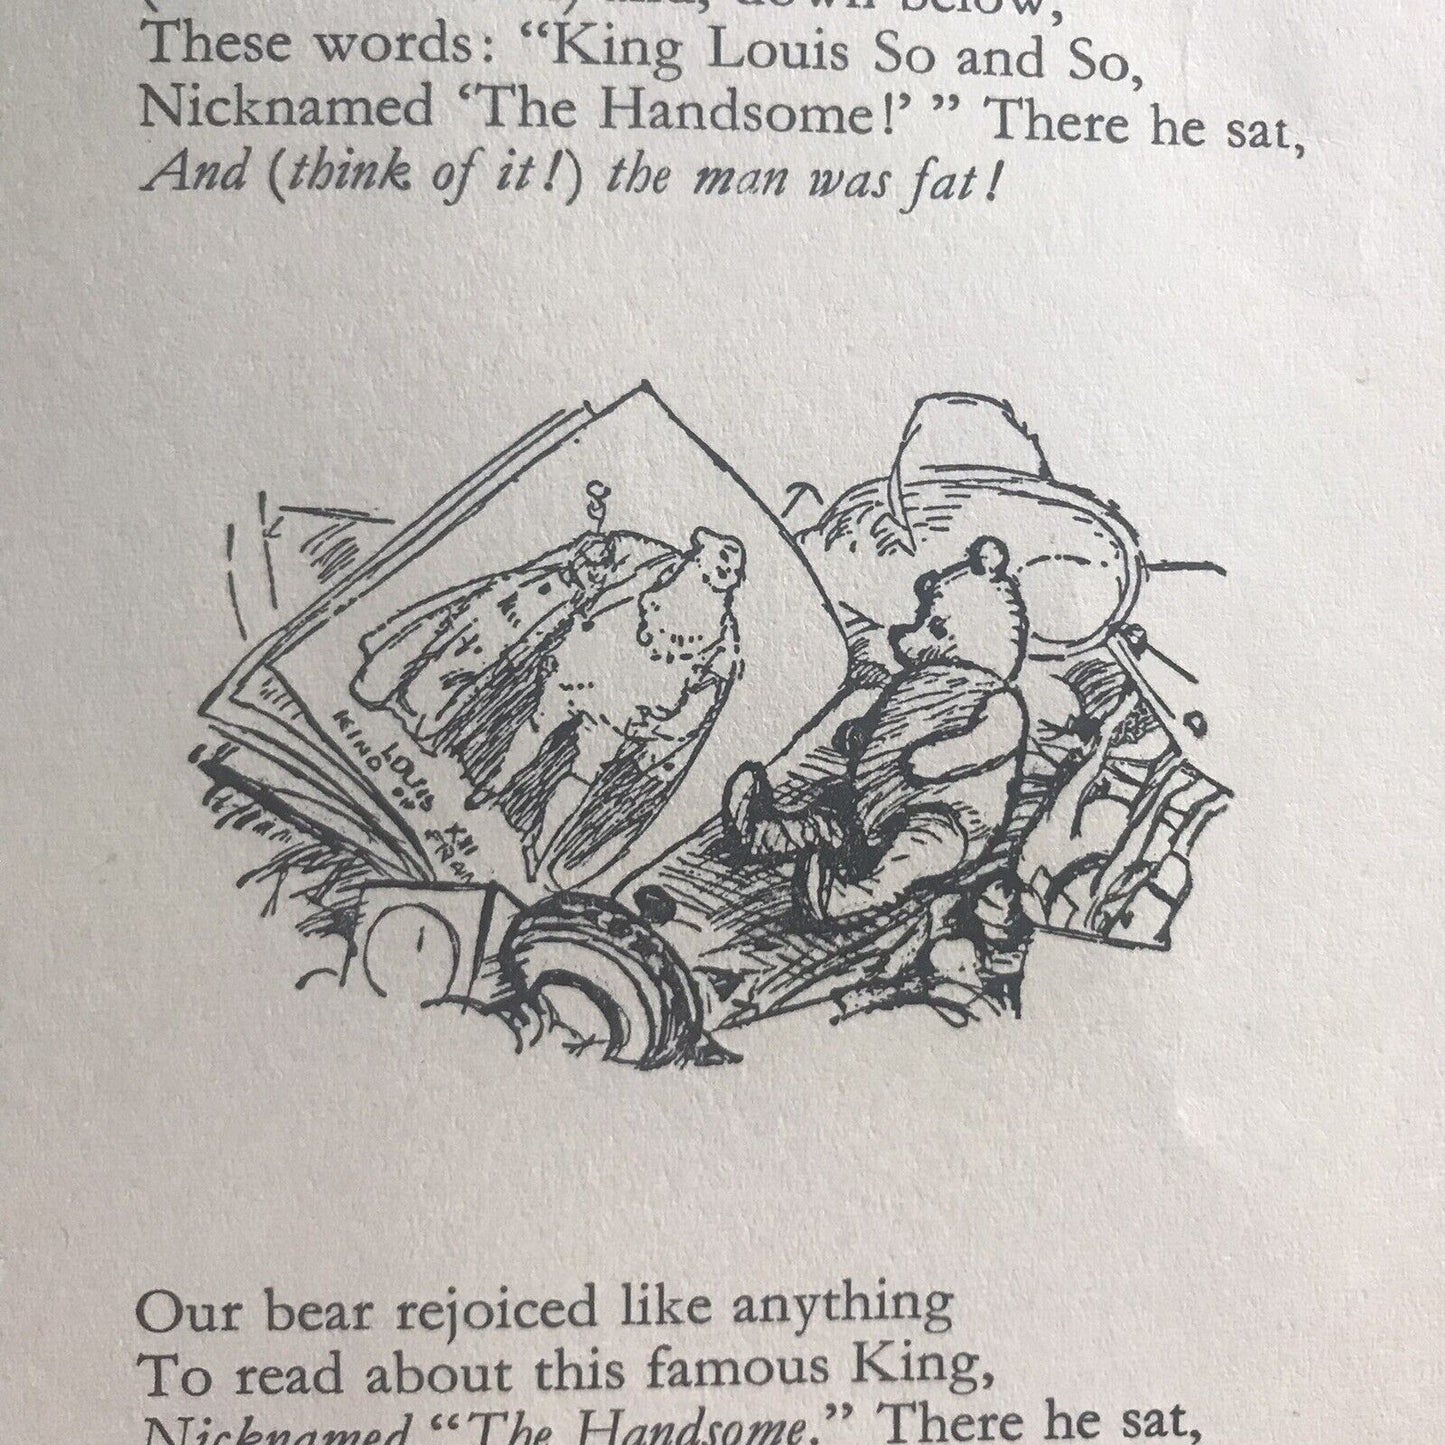 1965 When We Were Very Young - A. A. Milne(Shepard illust) Methuen